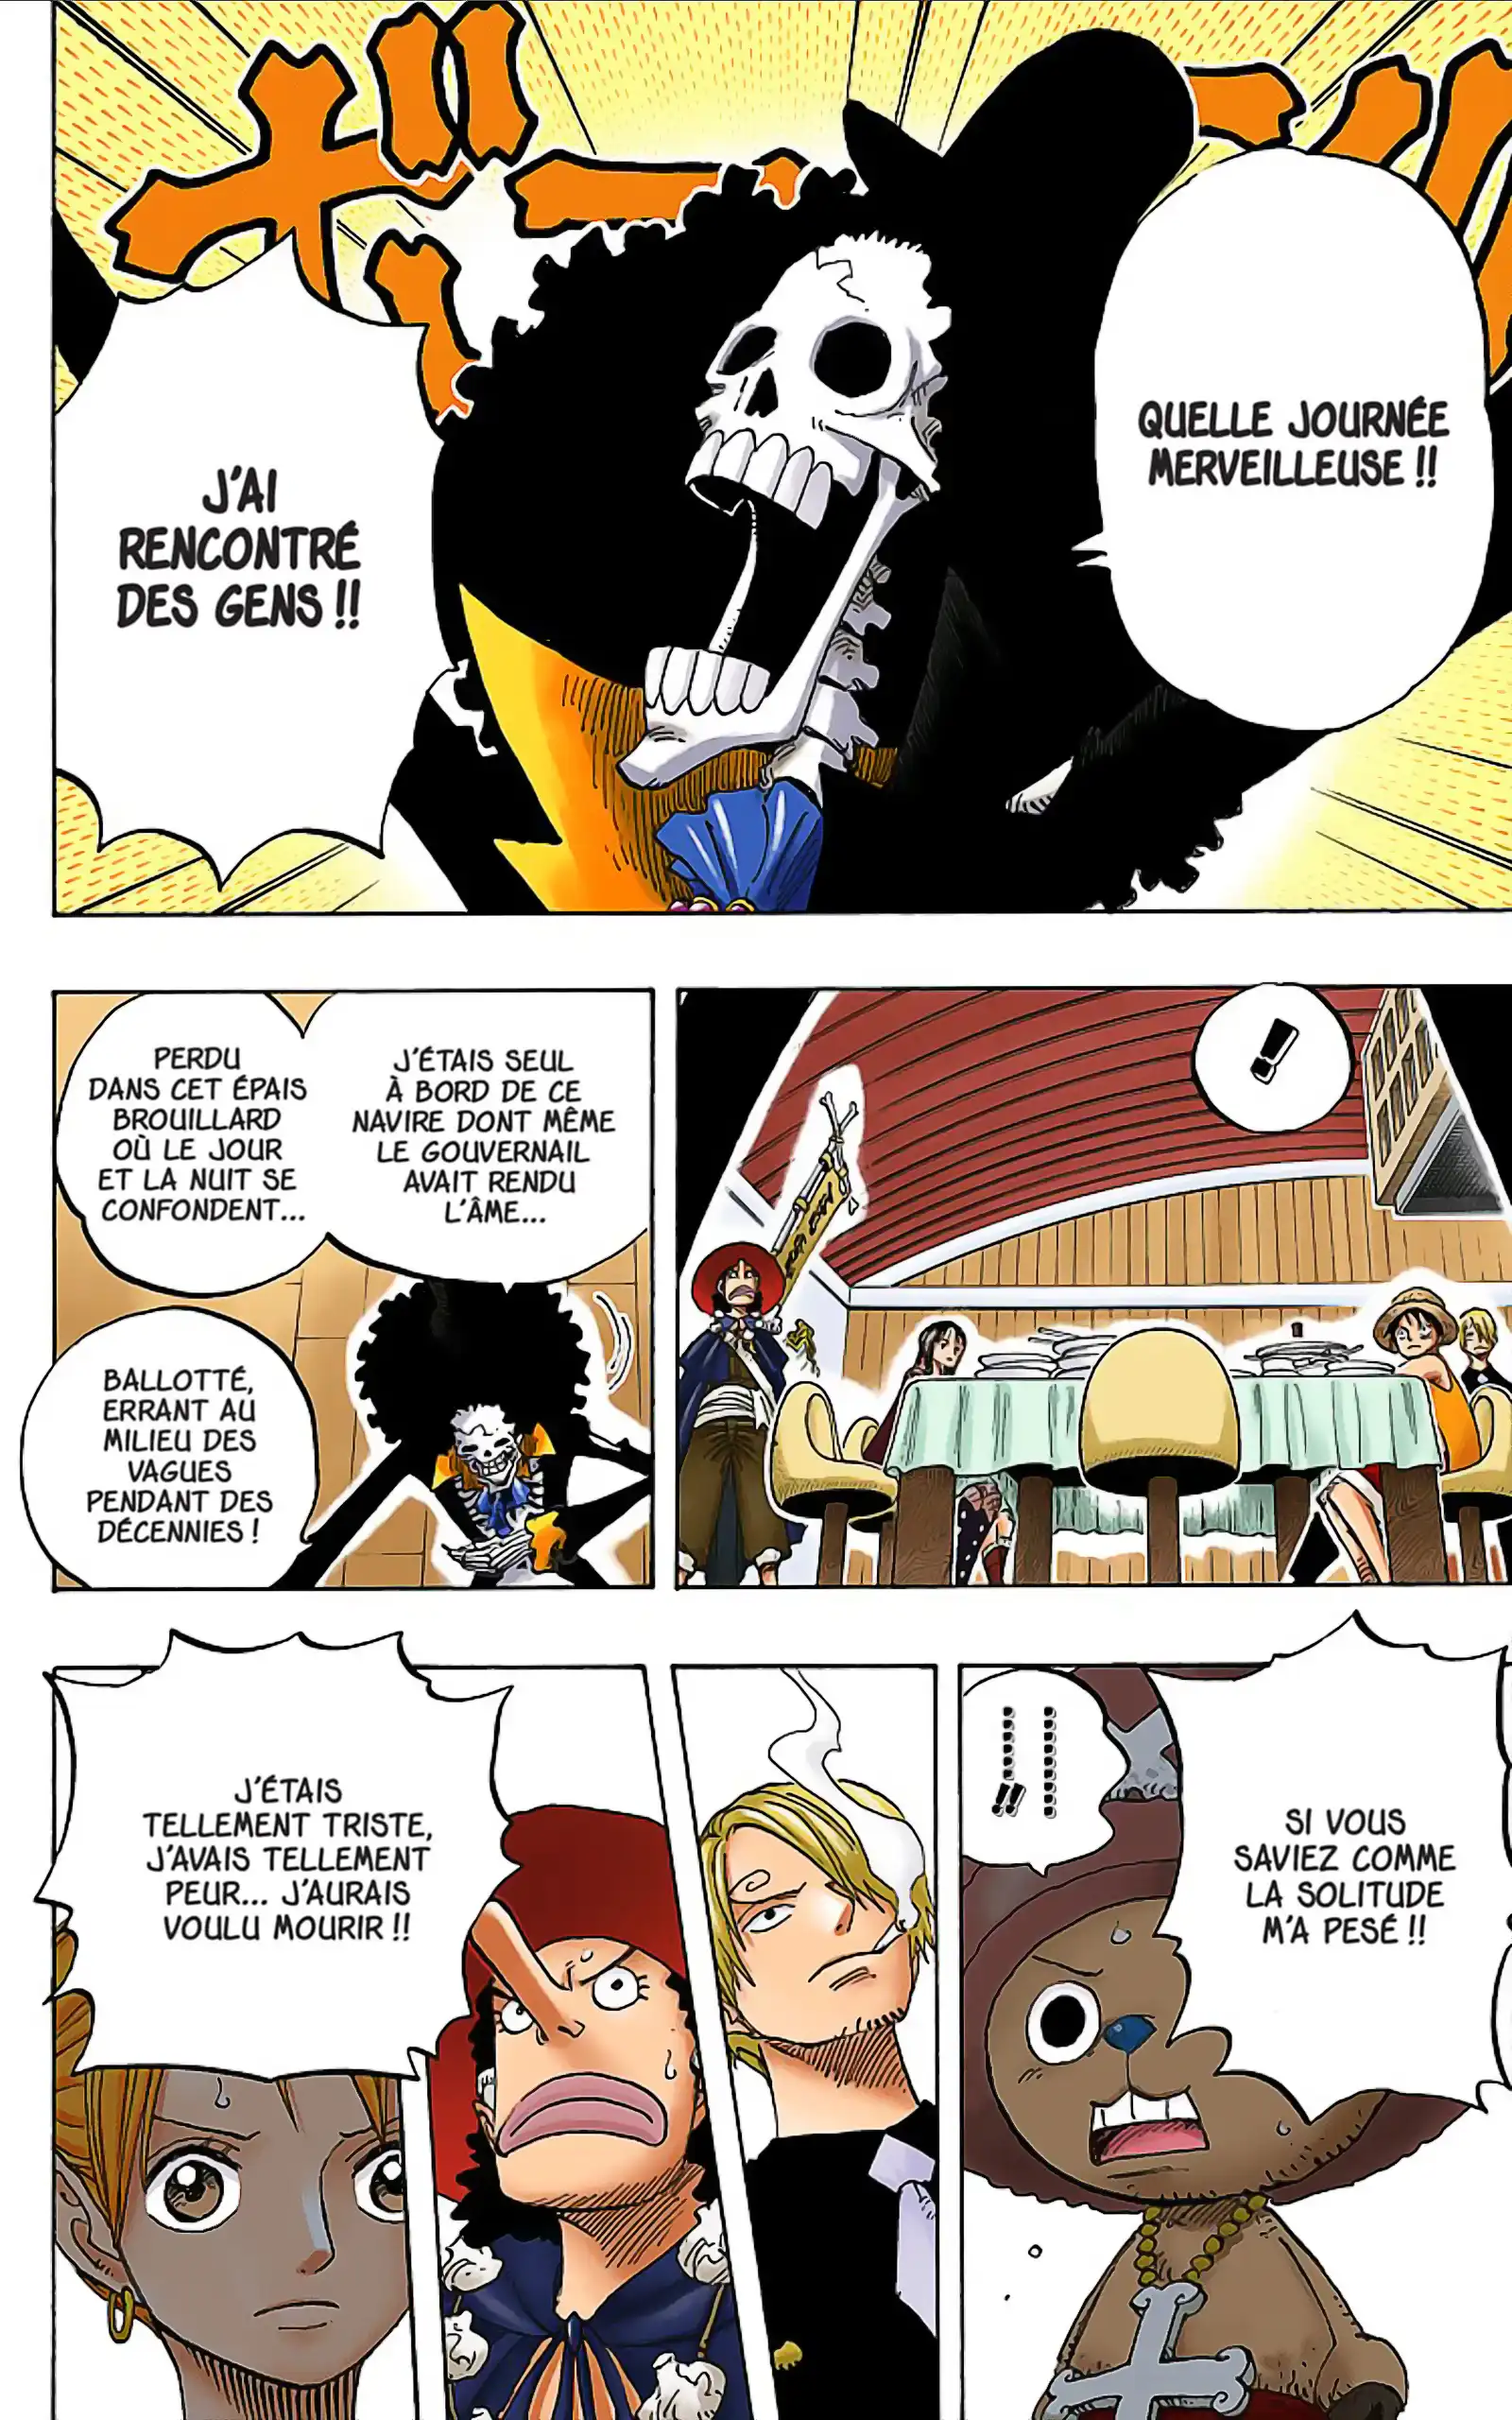 Part 3 - Post/Subpart n°4] Who or what are the Ancient Weapons, The One  Piece, The Great Kingdom or Laugh Tell? Drawing-Based, Fact-Based and  Myth-Based Theory inspired by the One Piece logos